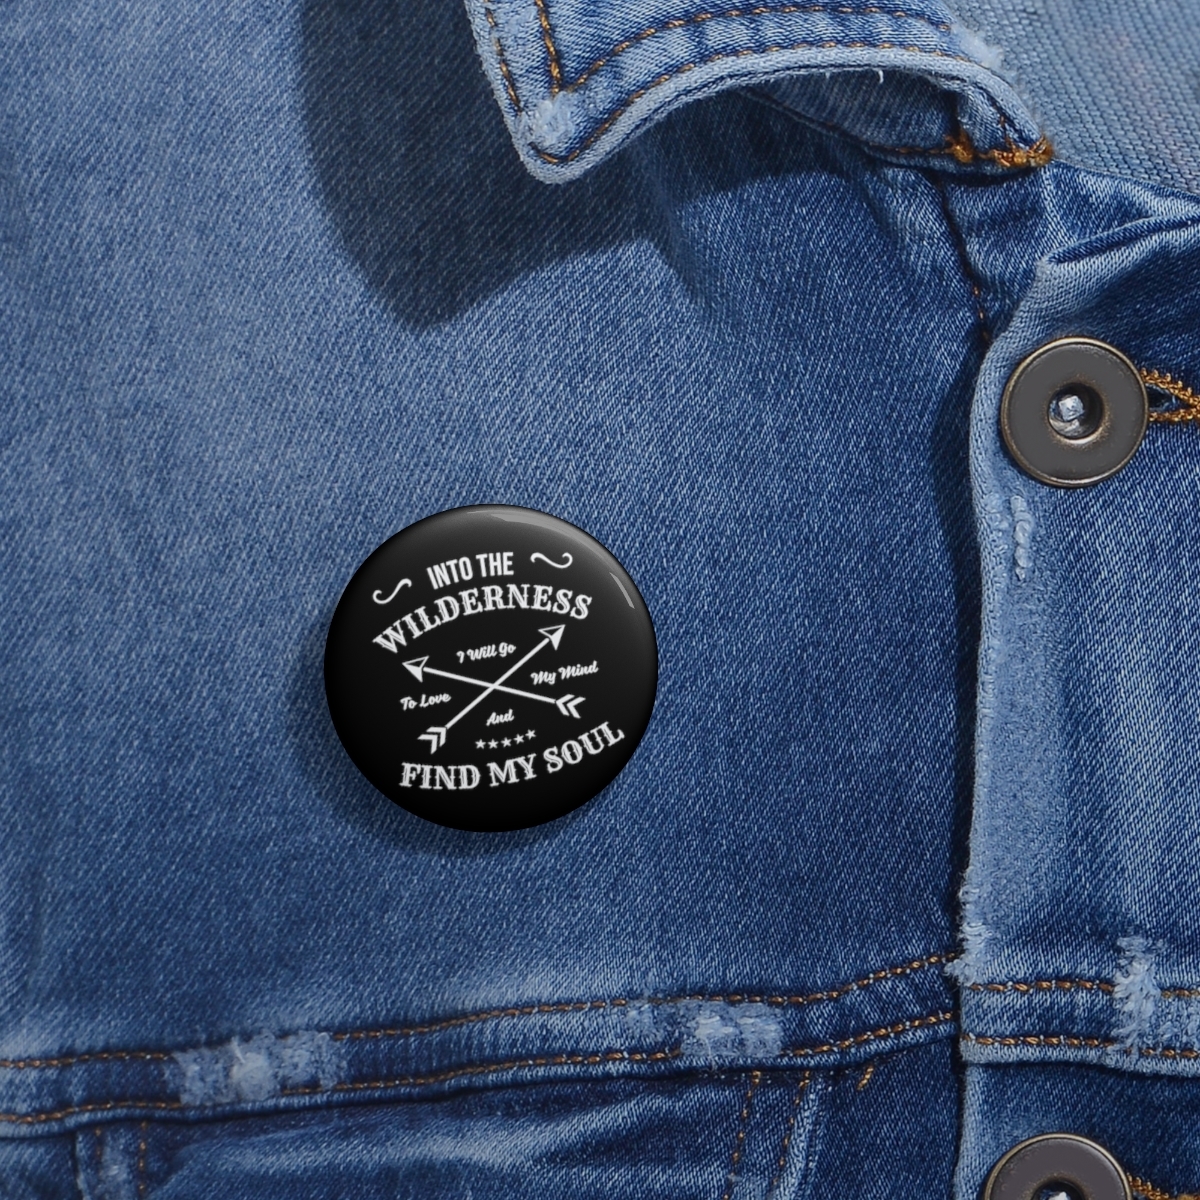 Primary image for Adventure-Ready Custom Pin Buttons: Durable Metal, Stunning Glossy Finish